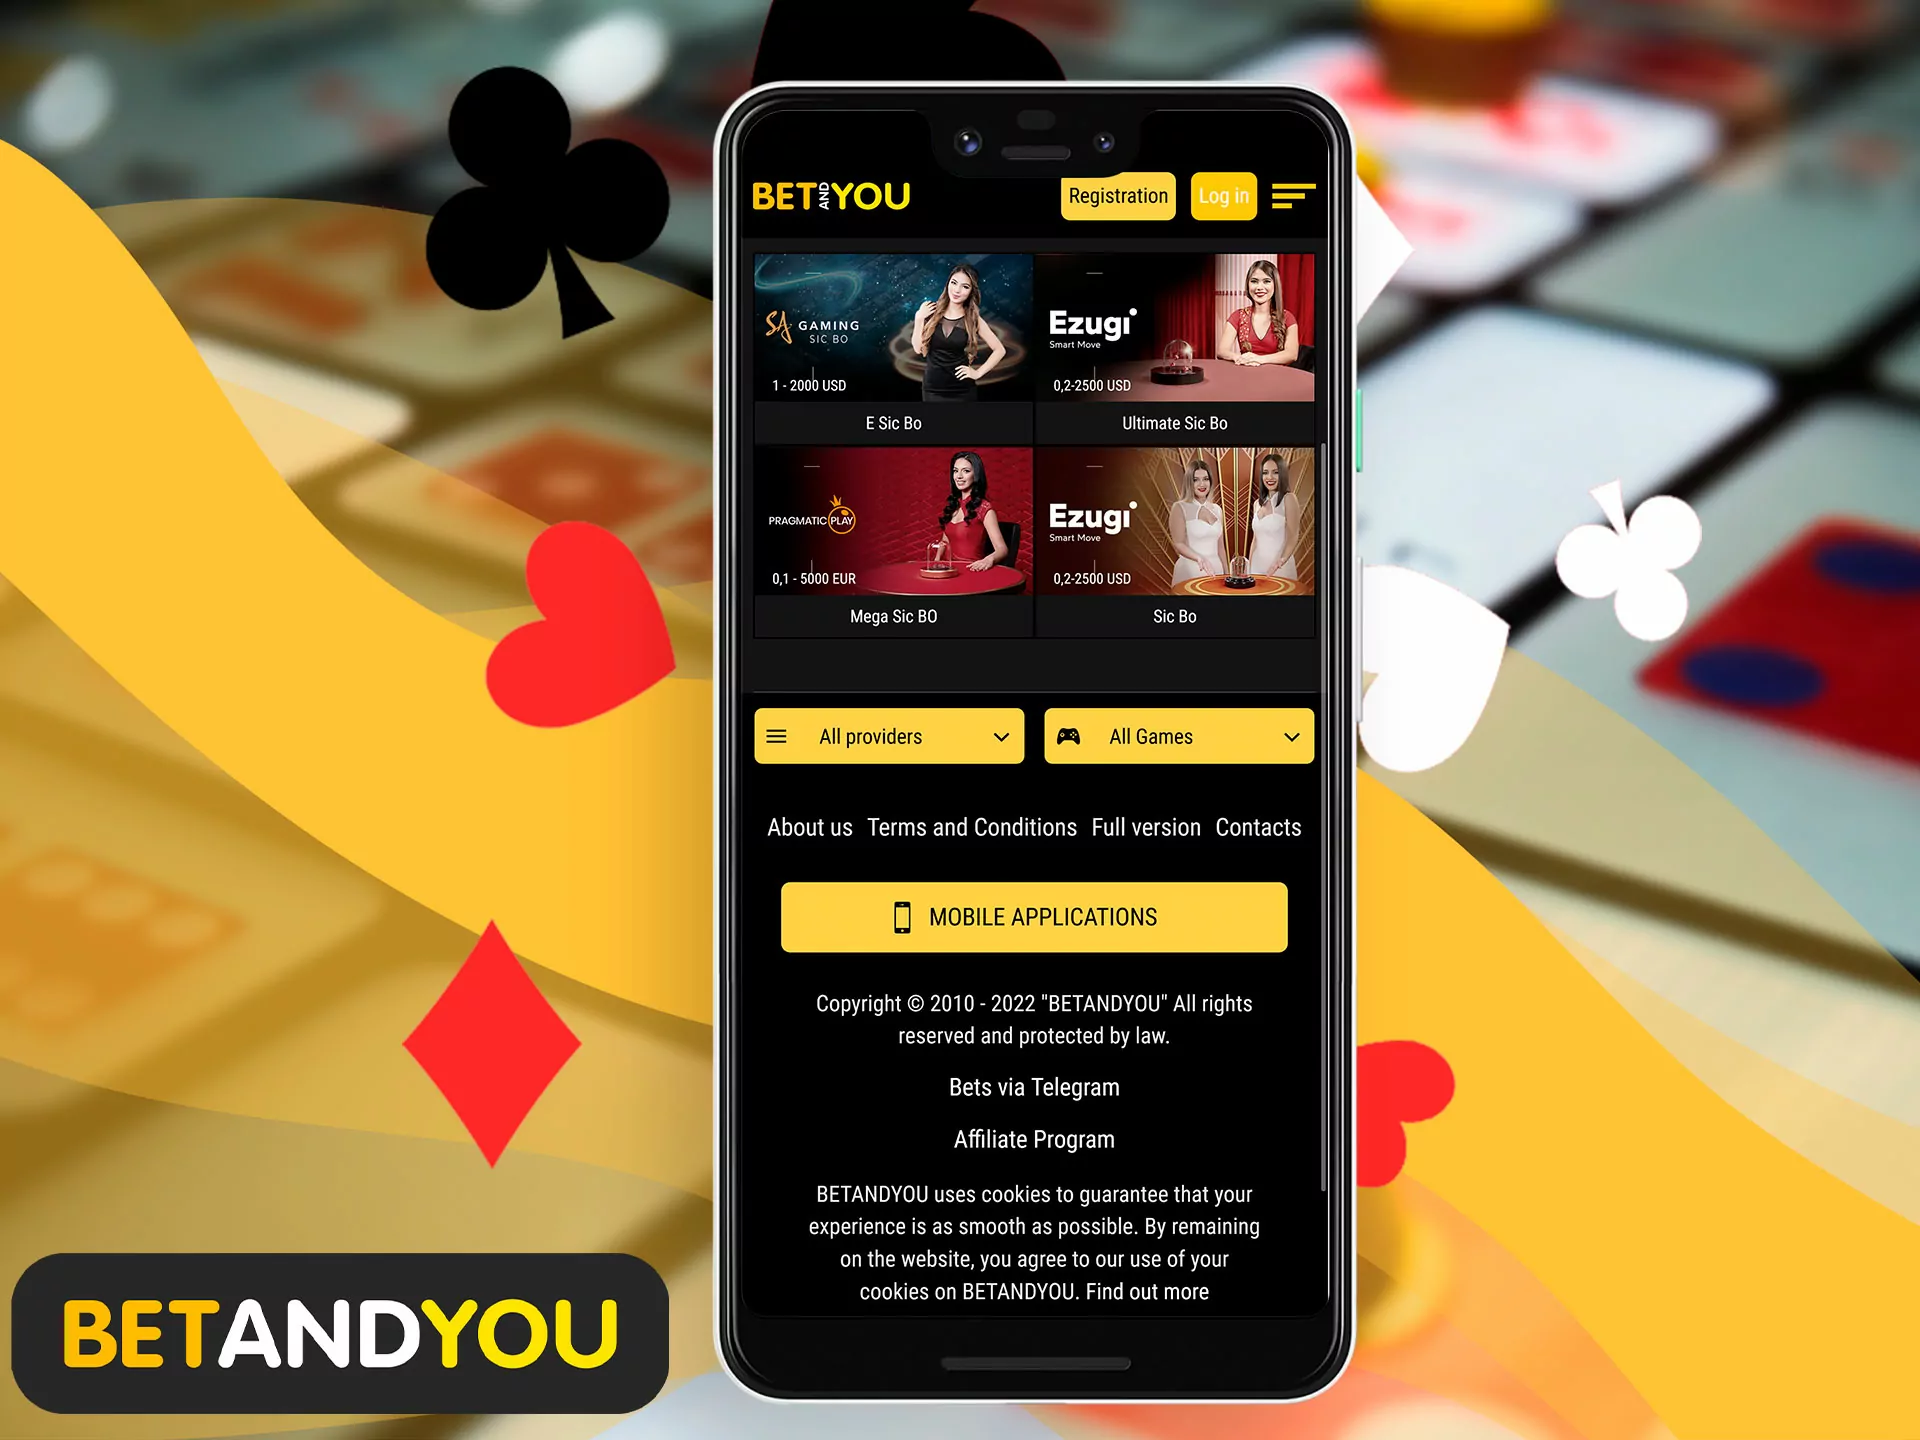 This game was created in China, and has become popular all over the world, the game uses dice, Bangladeshis can enjoy the game online at any time of the day at Betandyou Casino.